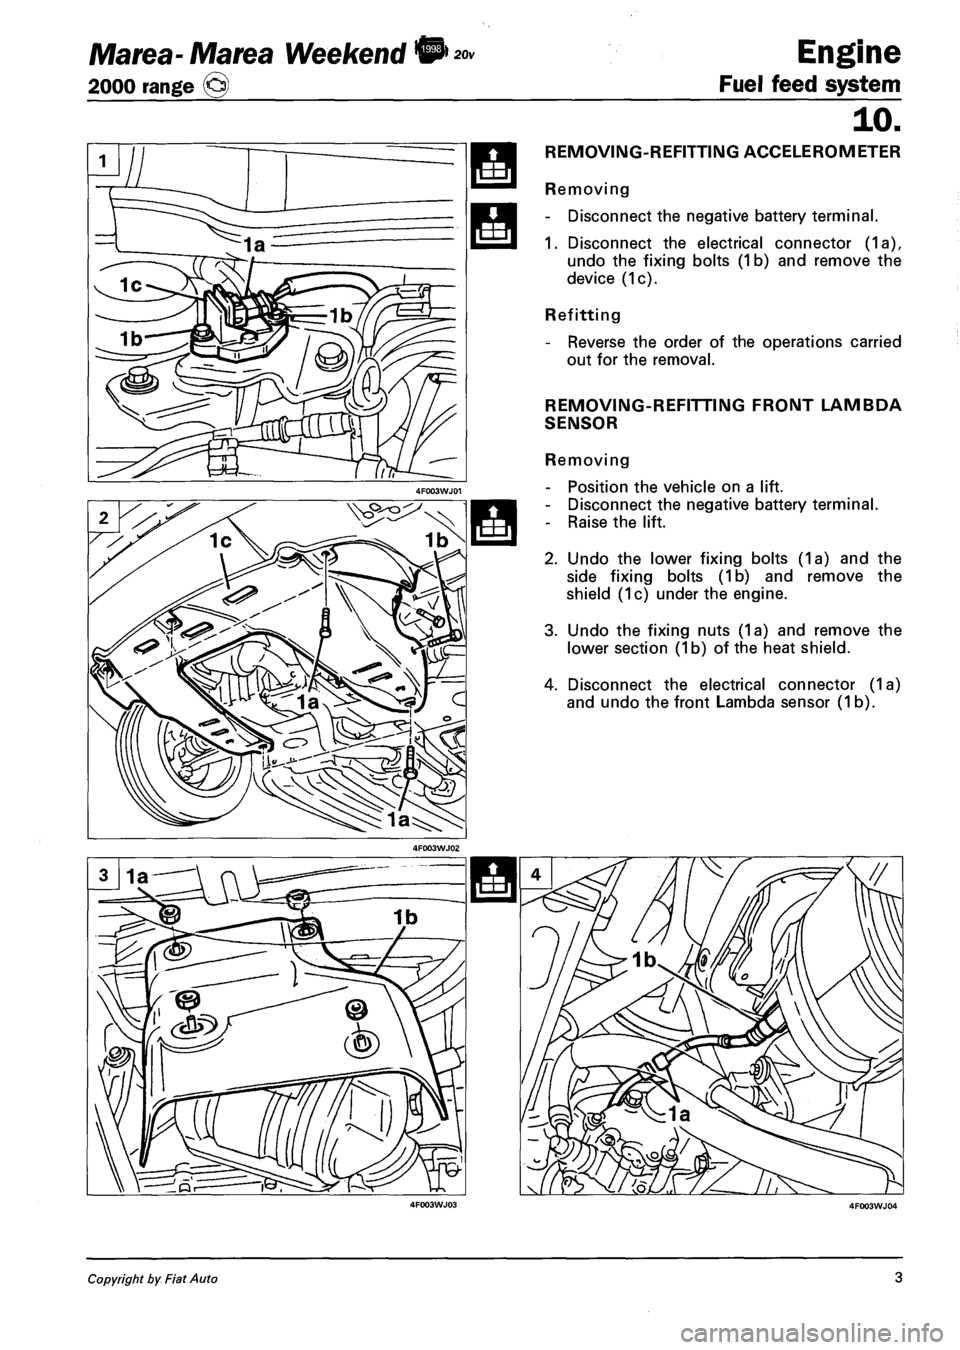 FIAT MAREA 2001 1.G Manual PDF Marea- Marea Weekend • 
2000 range © 
Engine 
Fuel feed system 
10. 
REMOVING-REFITTING ACCELEROMETER 
Removing 
- Disconnect the negative battery terminal. 
1. Disconnect the electrical connector 